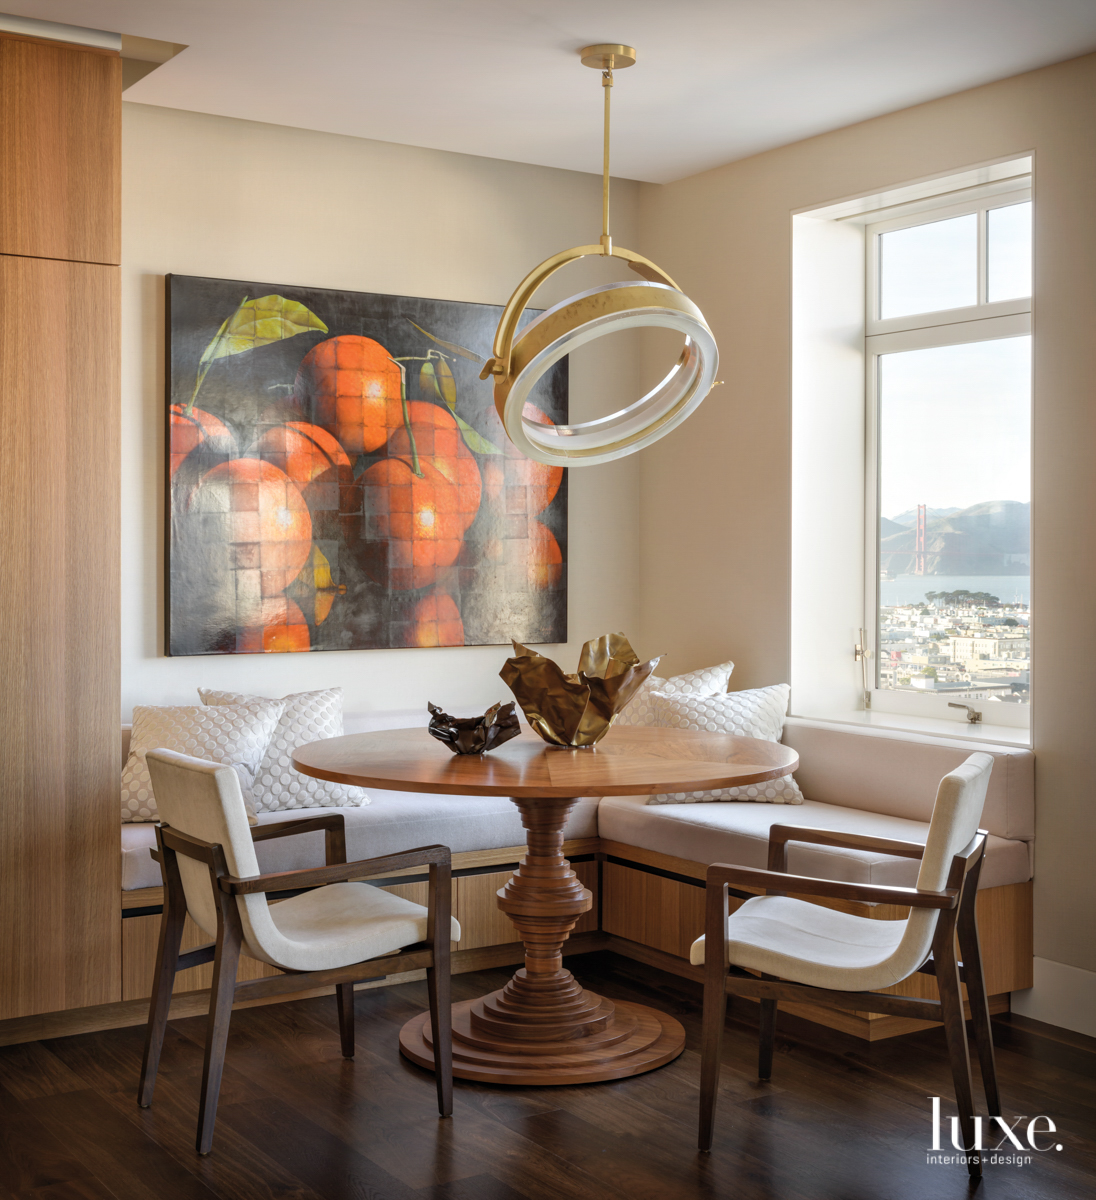 cozy breakfast nook with round table, white chairs and artwork of oranges